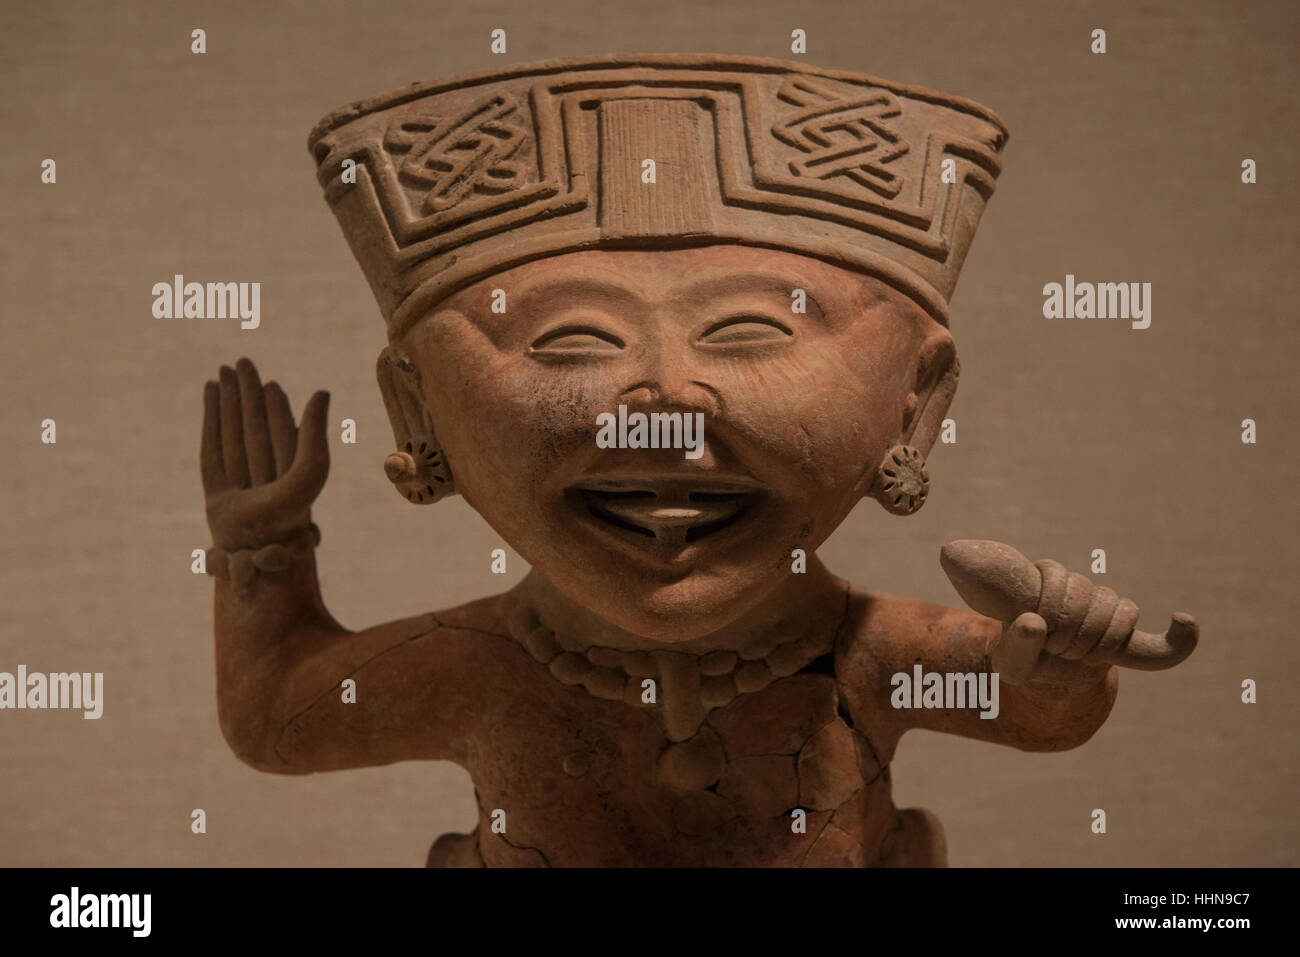 Sonrientes figurine in Remojadas style called 'smiling' figure exhibited at the Metropolitan Museum of Art in New York City. Stock Photo